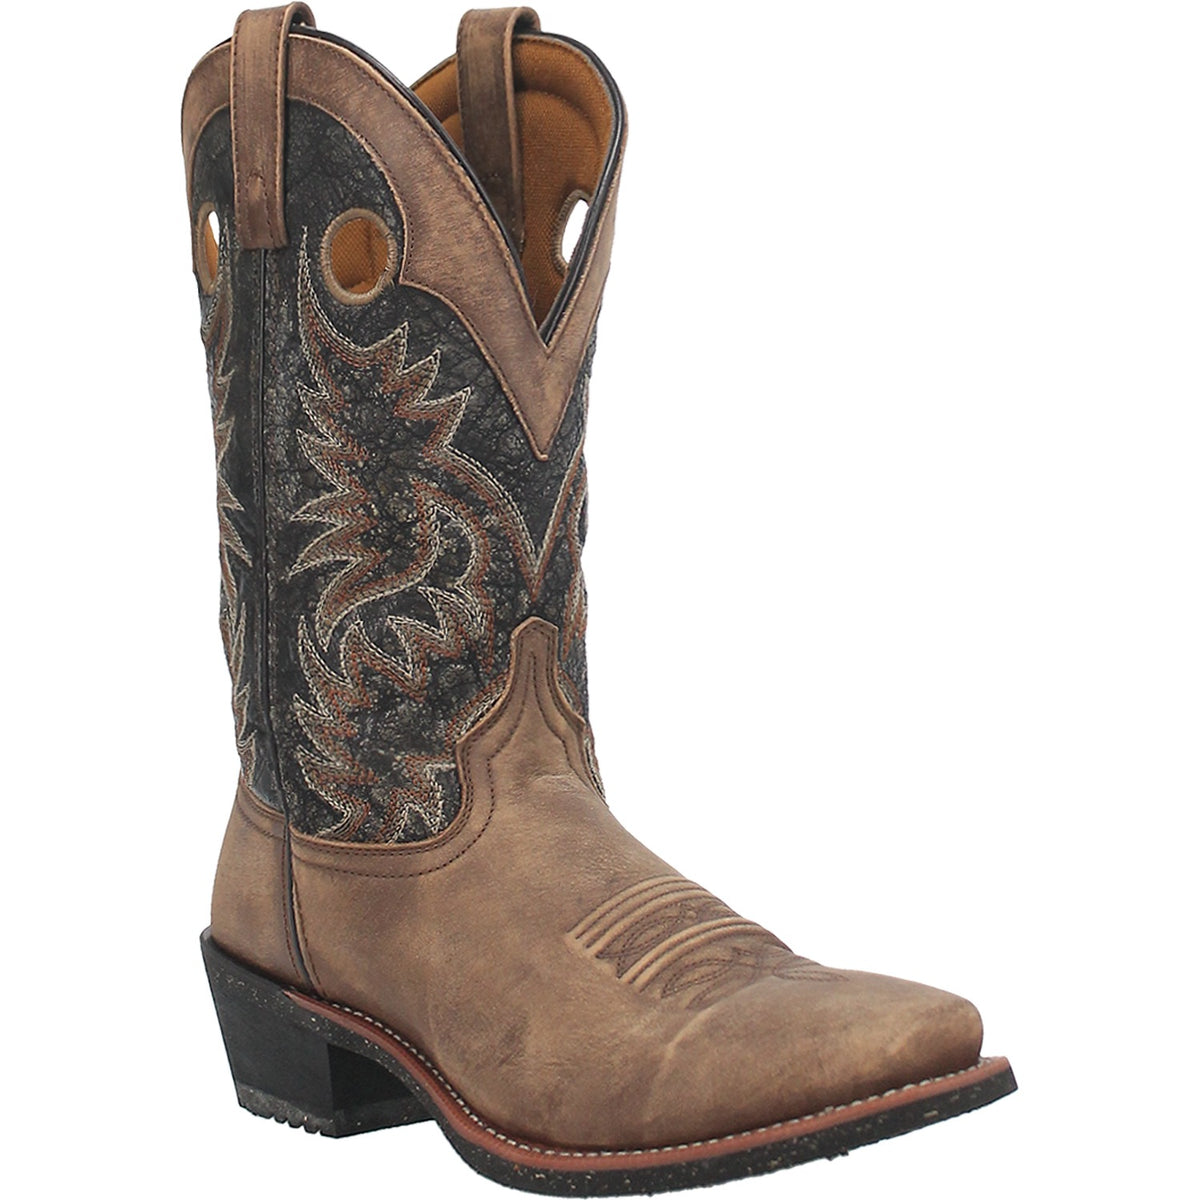 STILLWATER LEATHER BOOT Cover